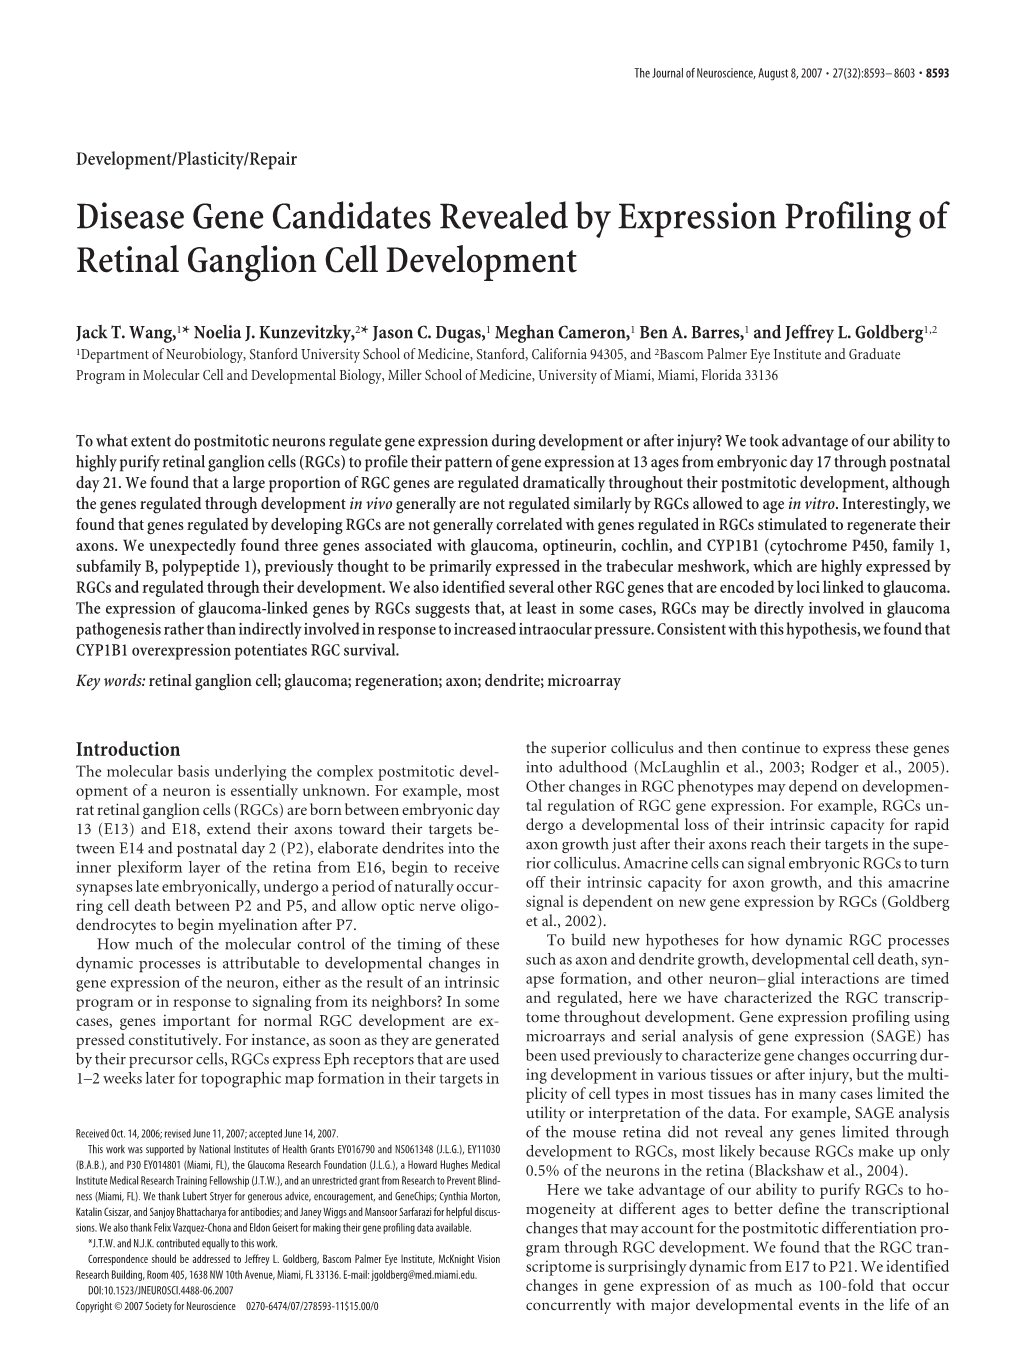 Disease Gene Candidates Revealed by Expression Profiling of Retinal Ganglion Cell Development